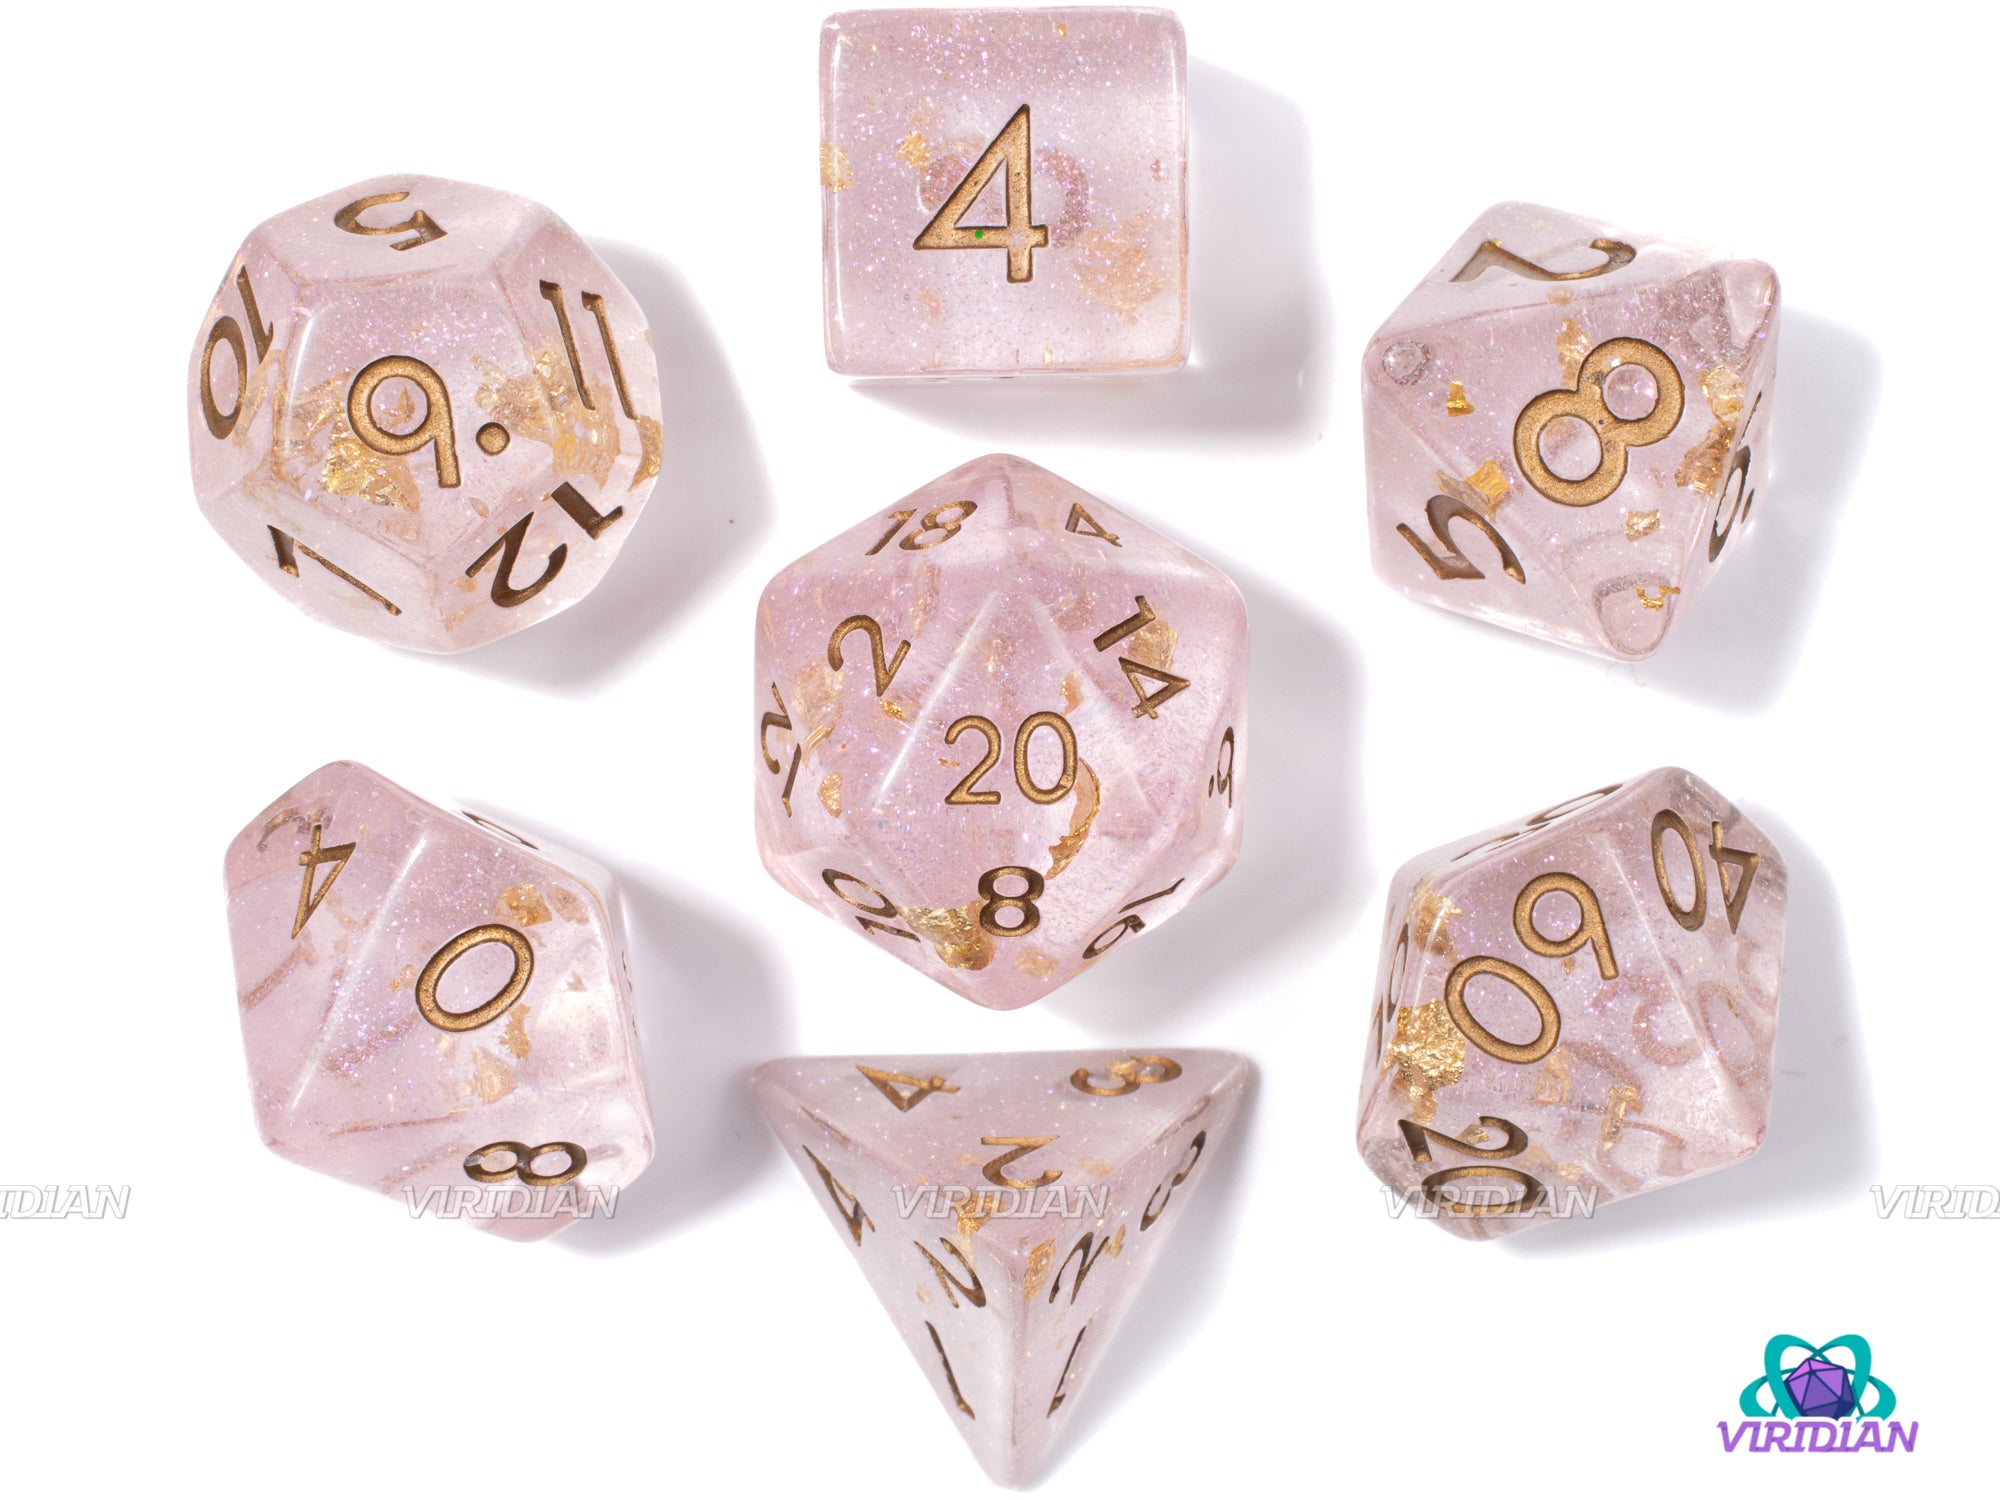 Goldschlager | Light Pink, Gold Leaf Glittery Resin Dice Set (7) | Dungeons and Dragons (DnD)